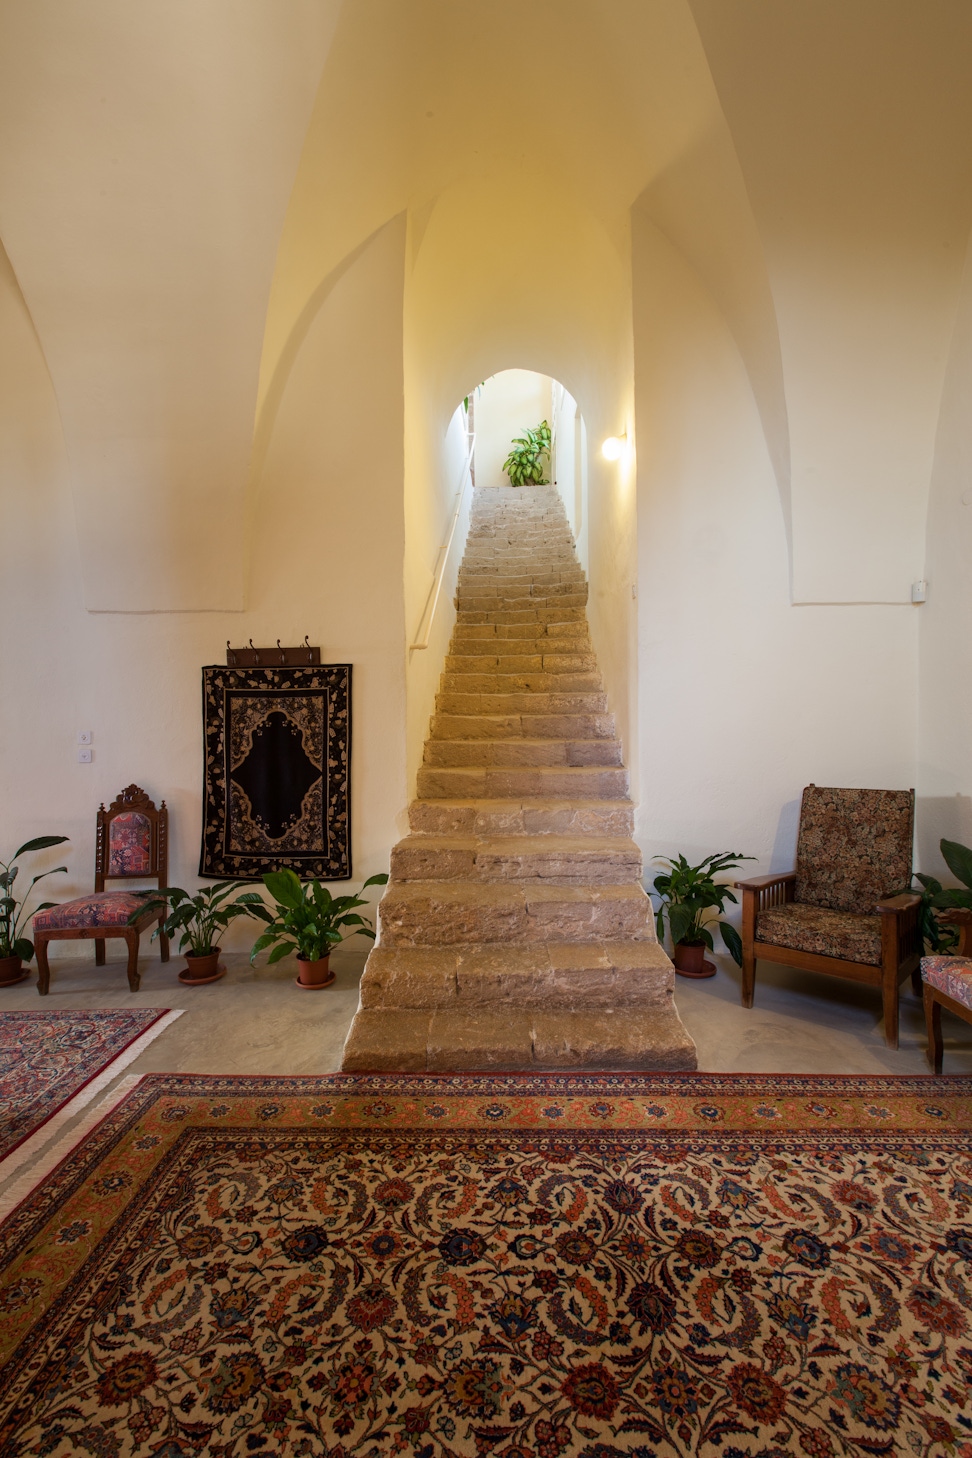 Staircase leading to the upper level of the Mansion